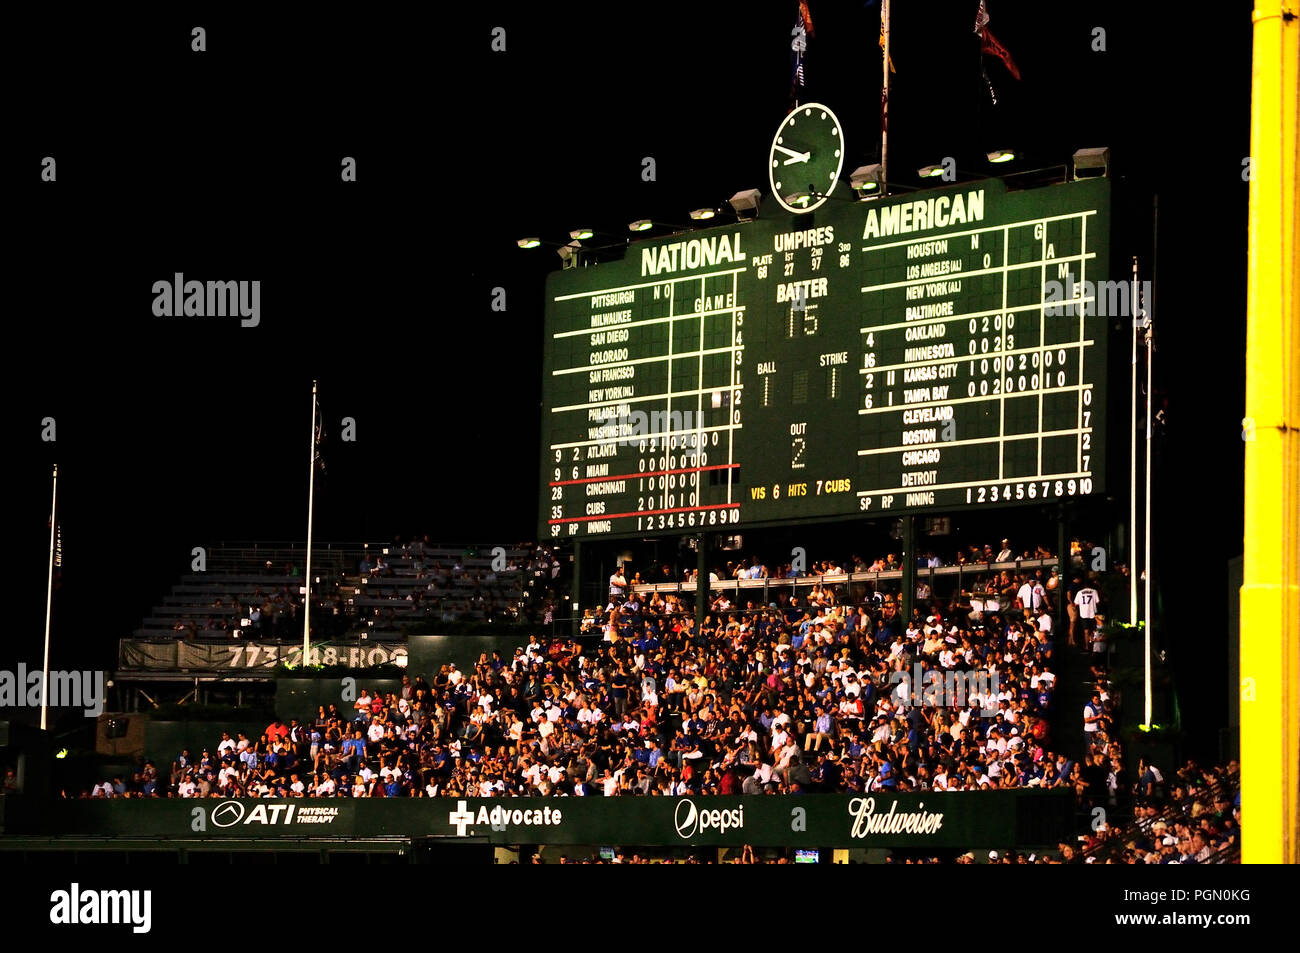 SPORTS Chicago Illinois Night game at Wrigley Field fans in bleachers  traditional scoreboard ivy on outfield wall Stock Photo - Alamy